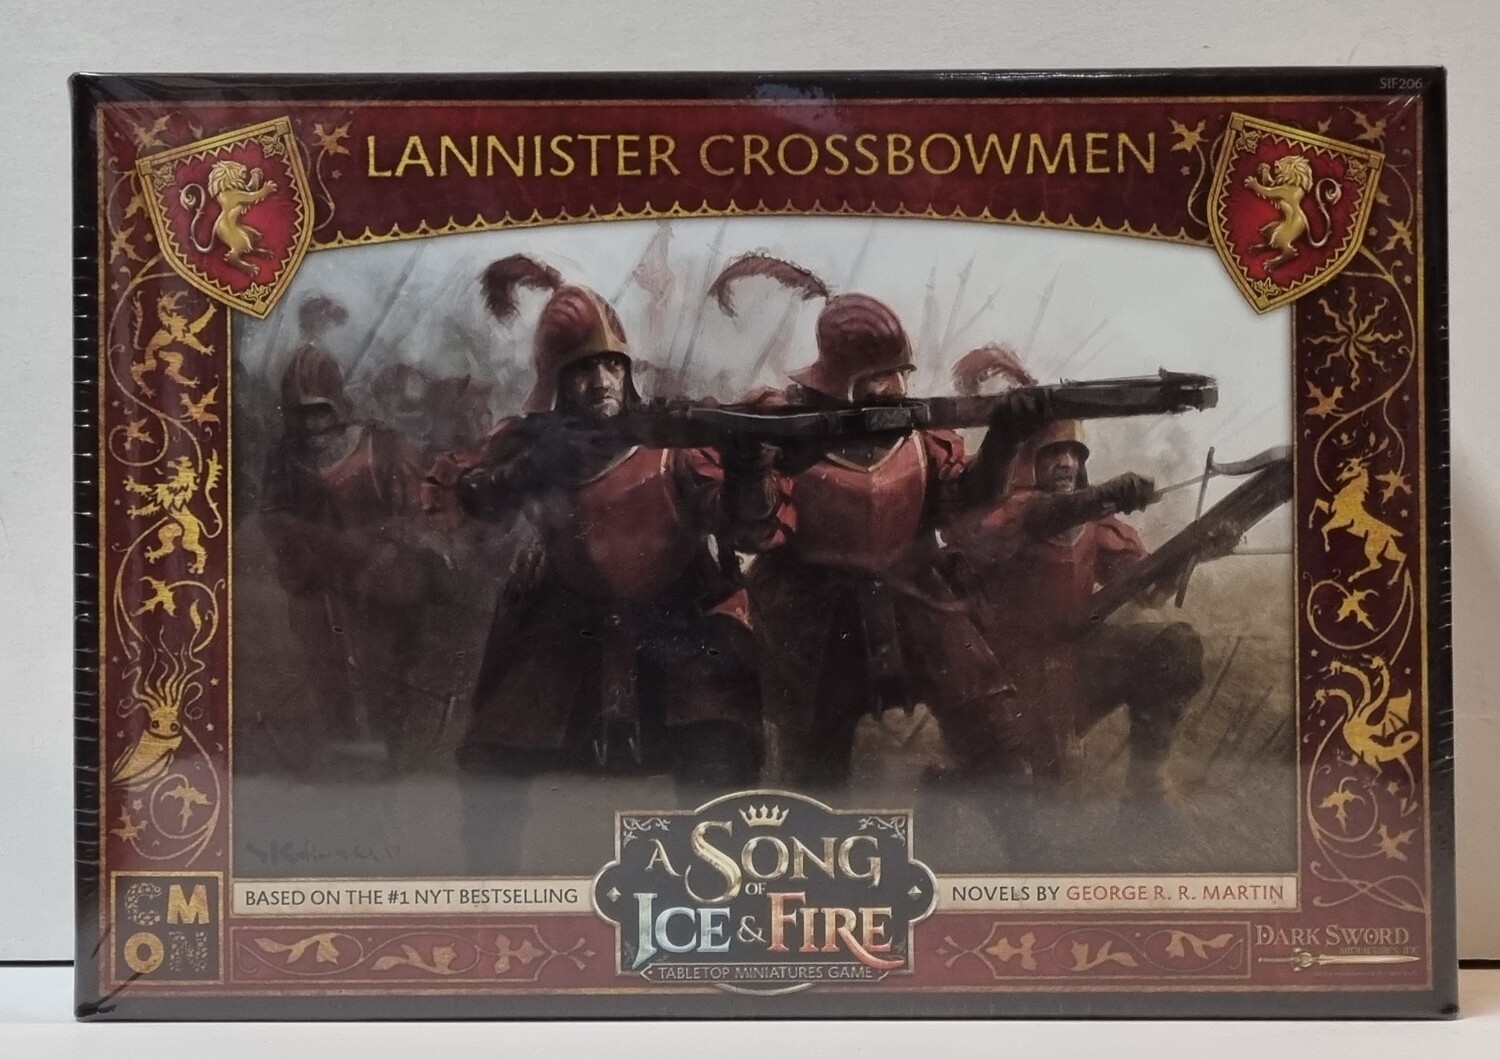 A Song of Ice & Fire, SIF206, Lannister Crossbowmen